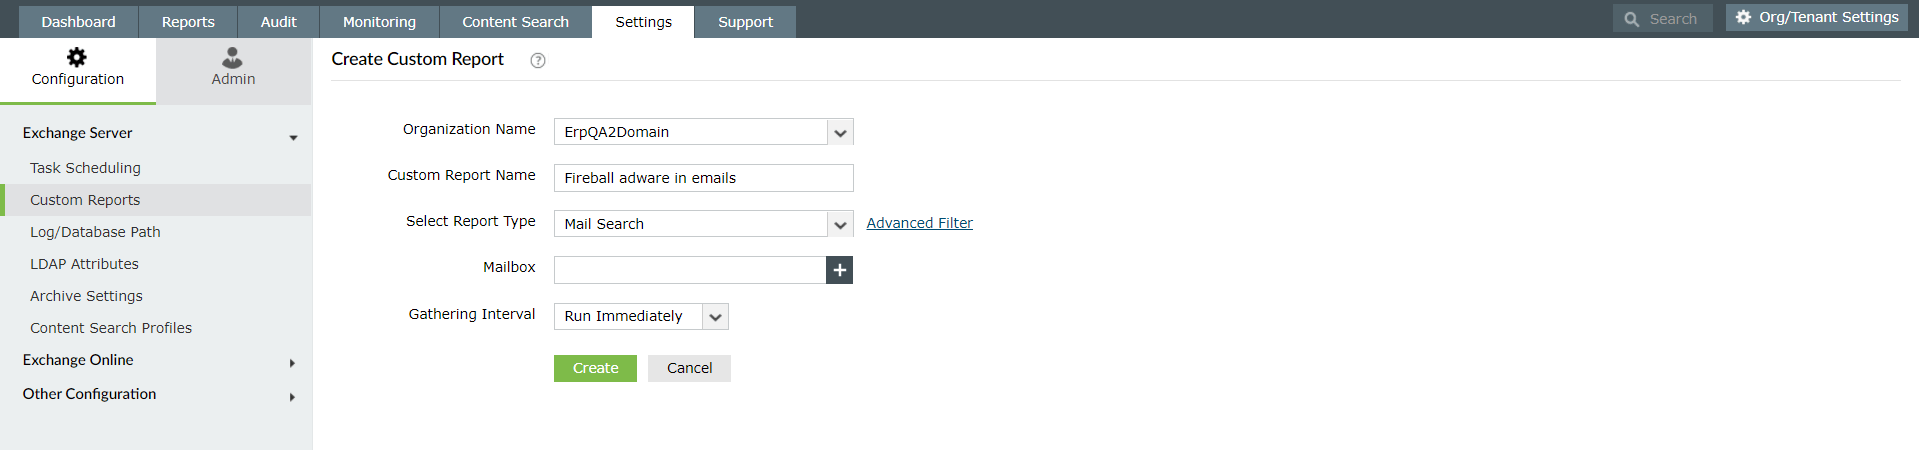 Customize a report to locate malicious emails